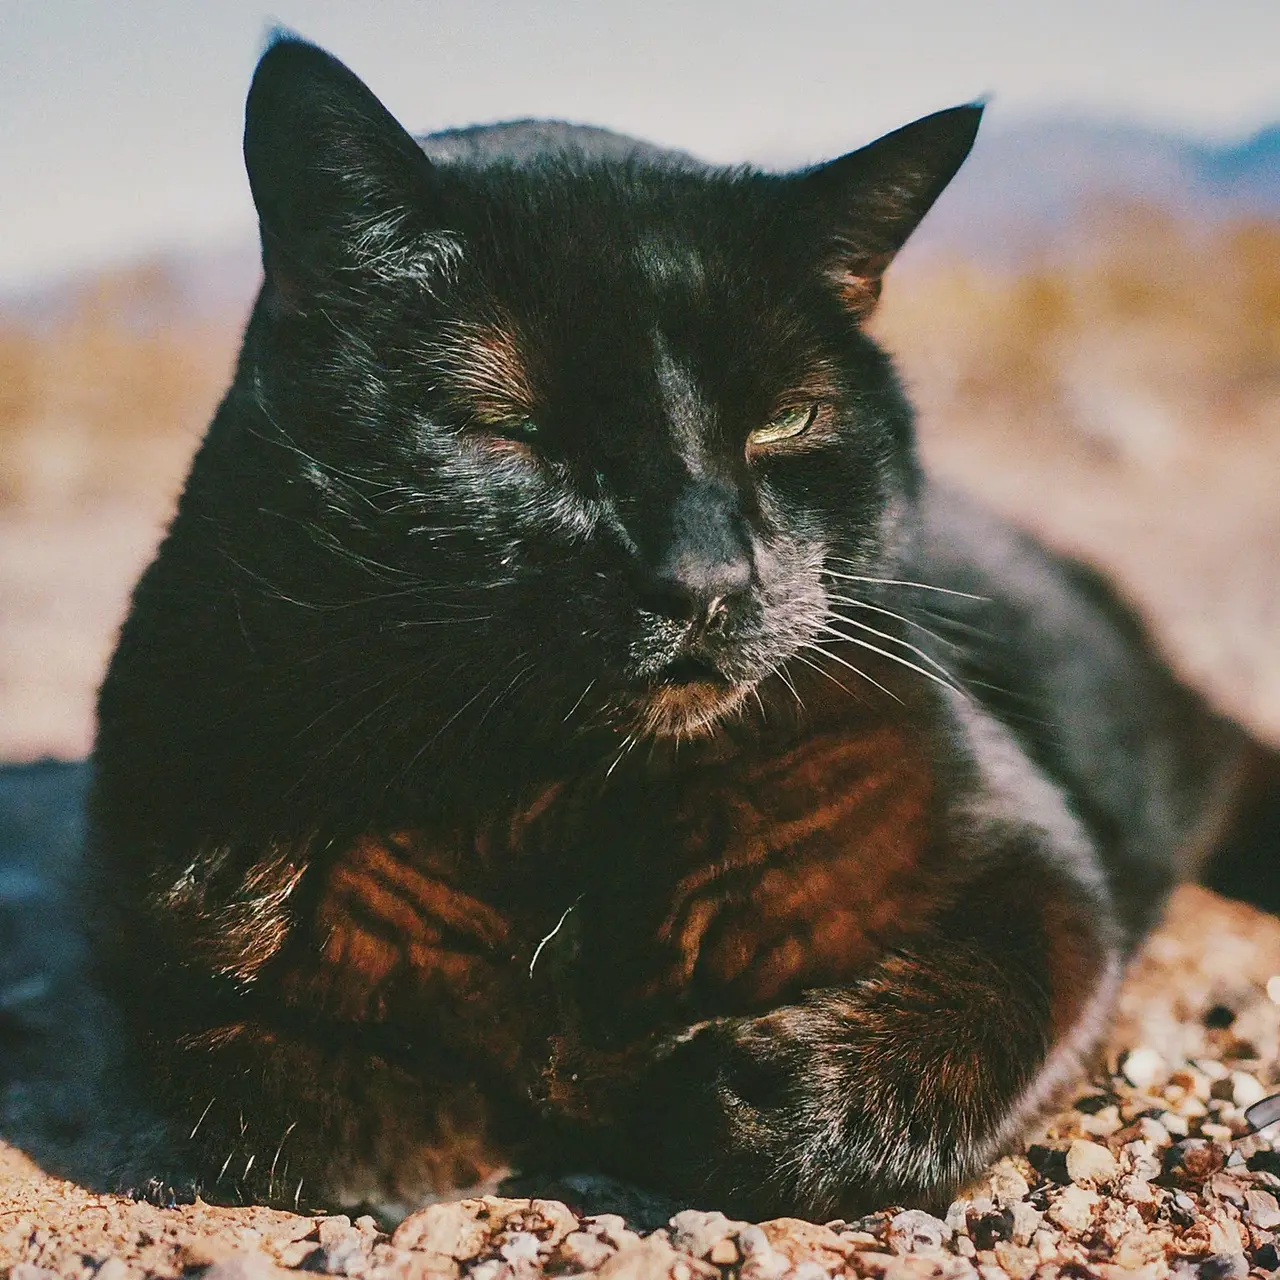 A black cat lounging in the Nevada desert sun. 35mm stock photo